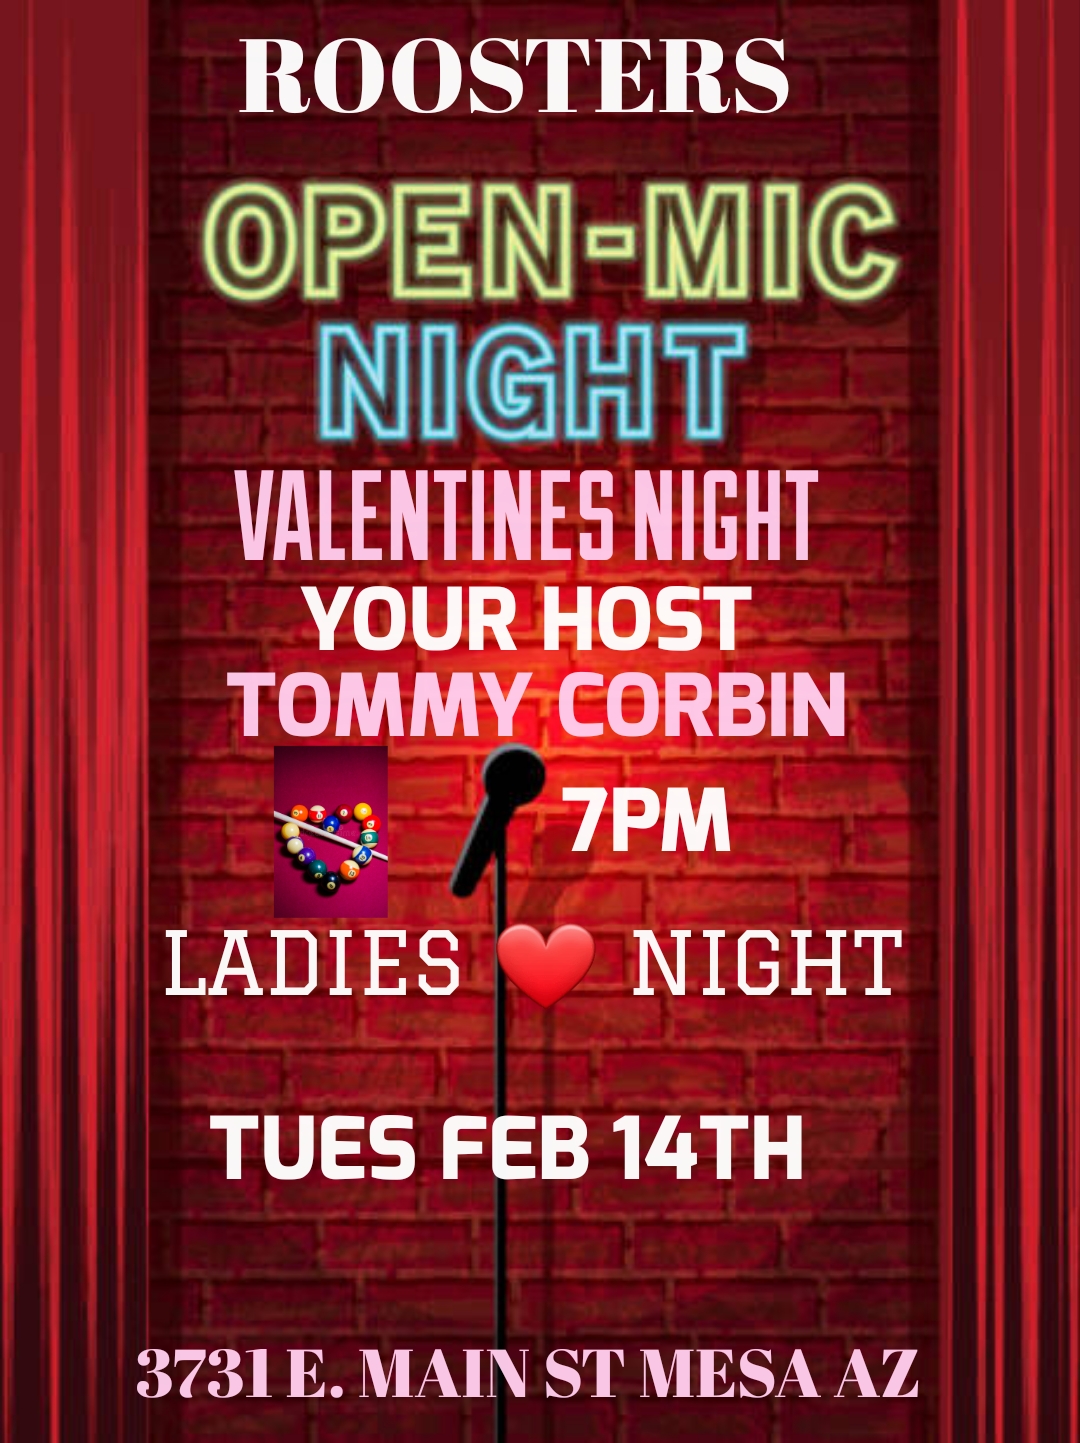 Roosters Open Mic with Tommy Corbin